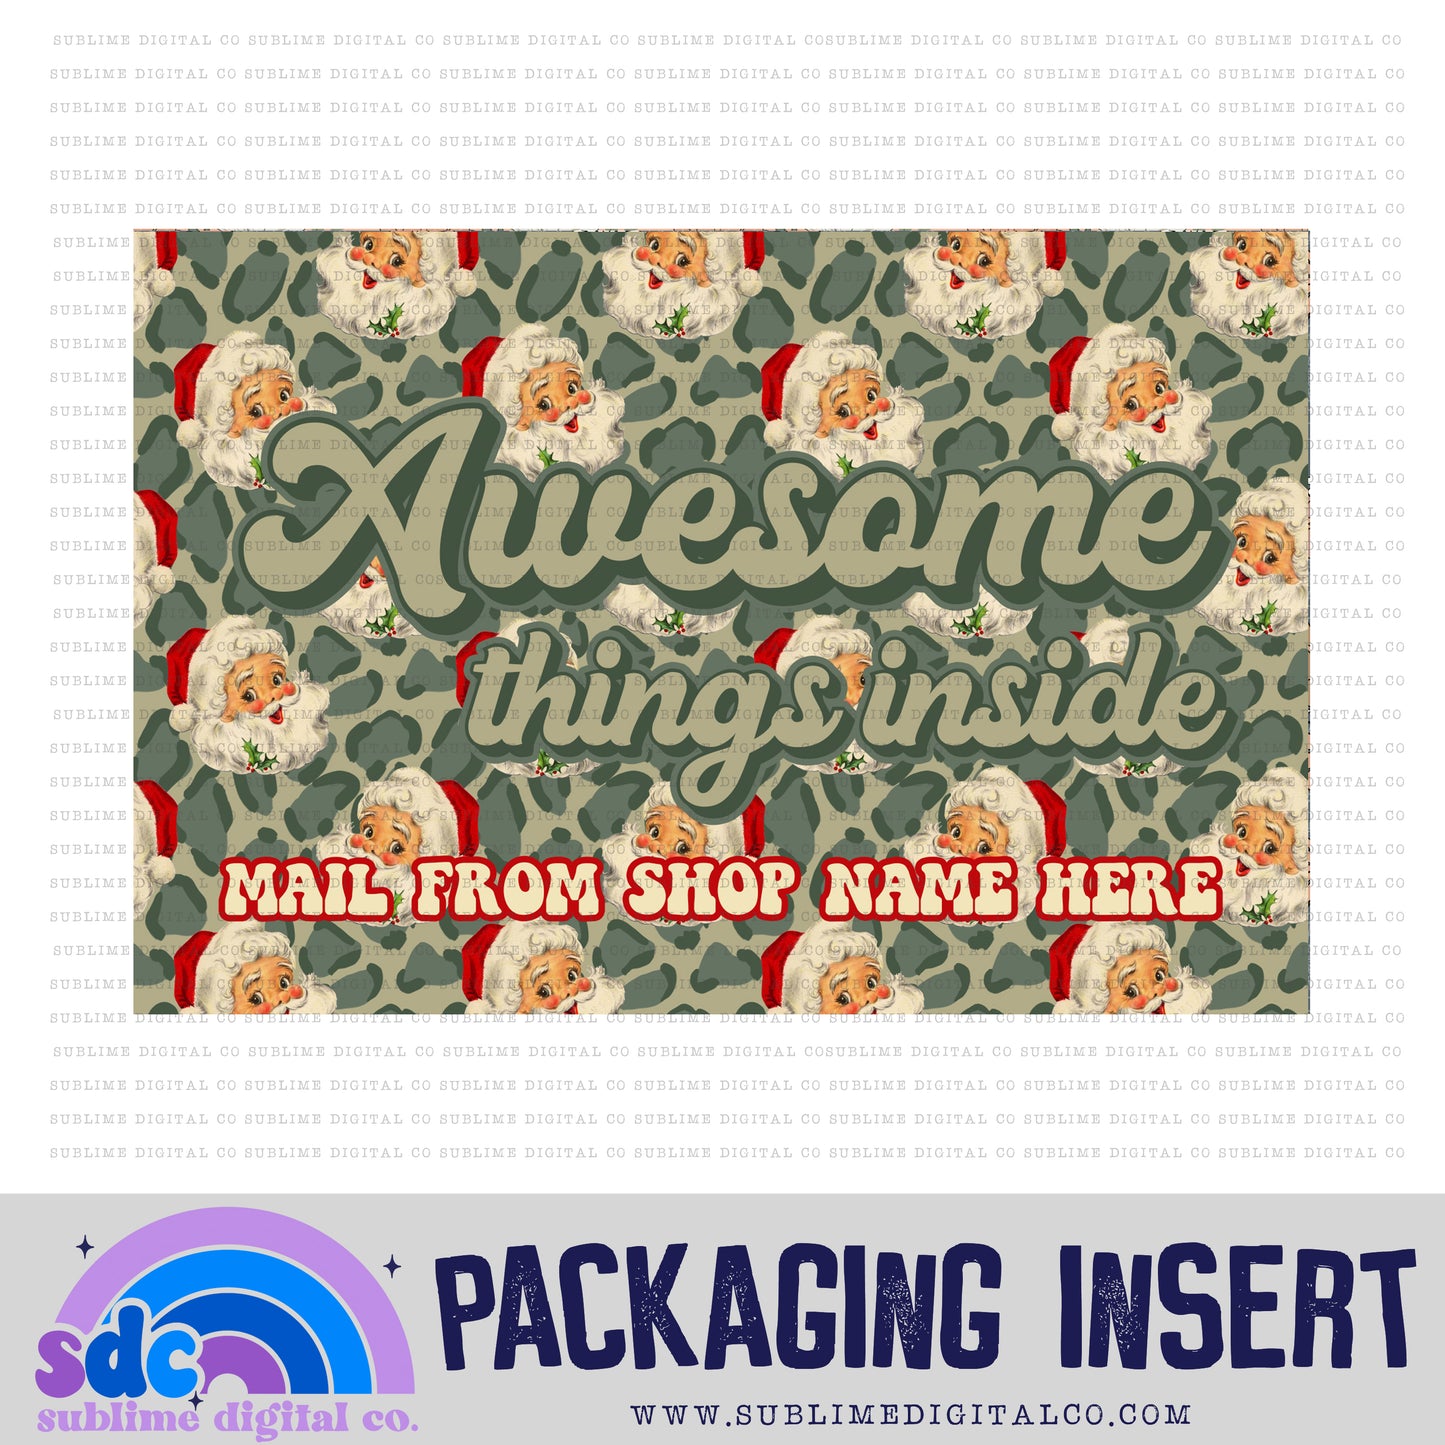 Awesome Things Inside • Leopard Santa • Custom Business Name Packaging Insert